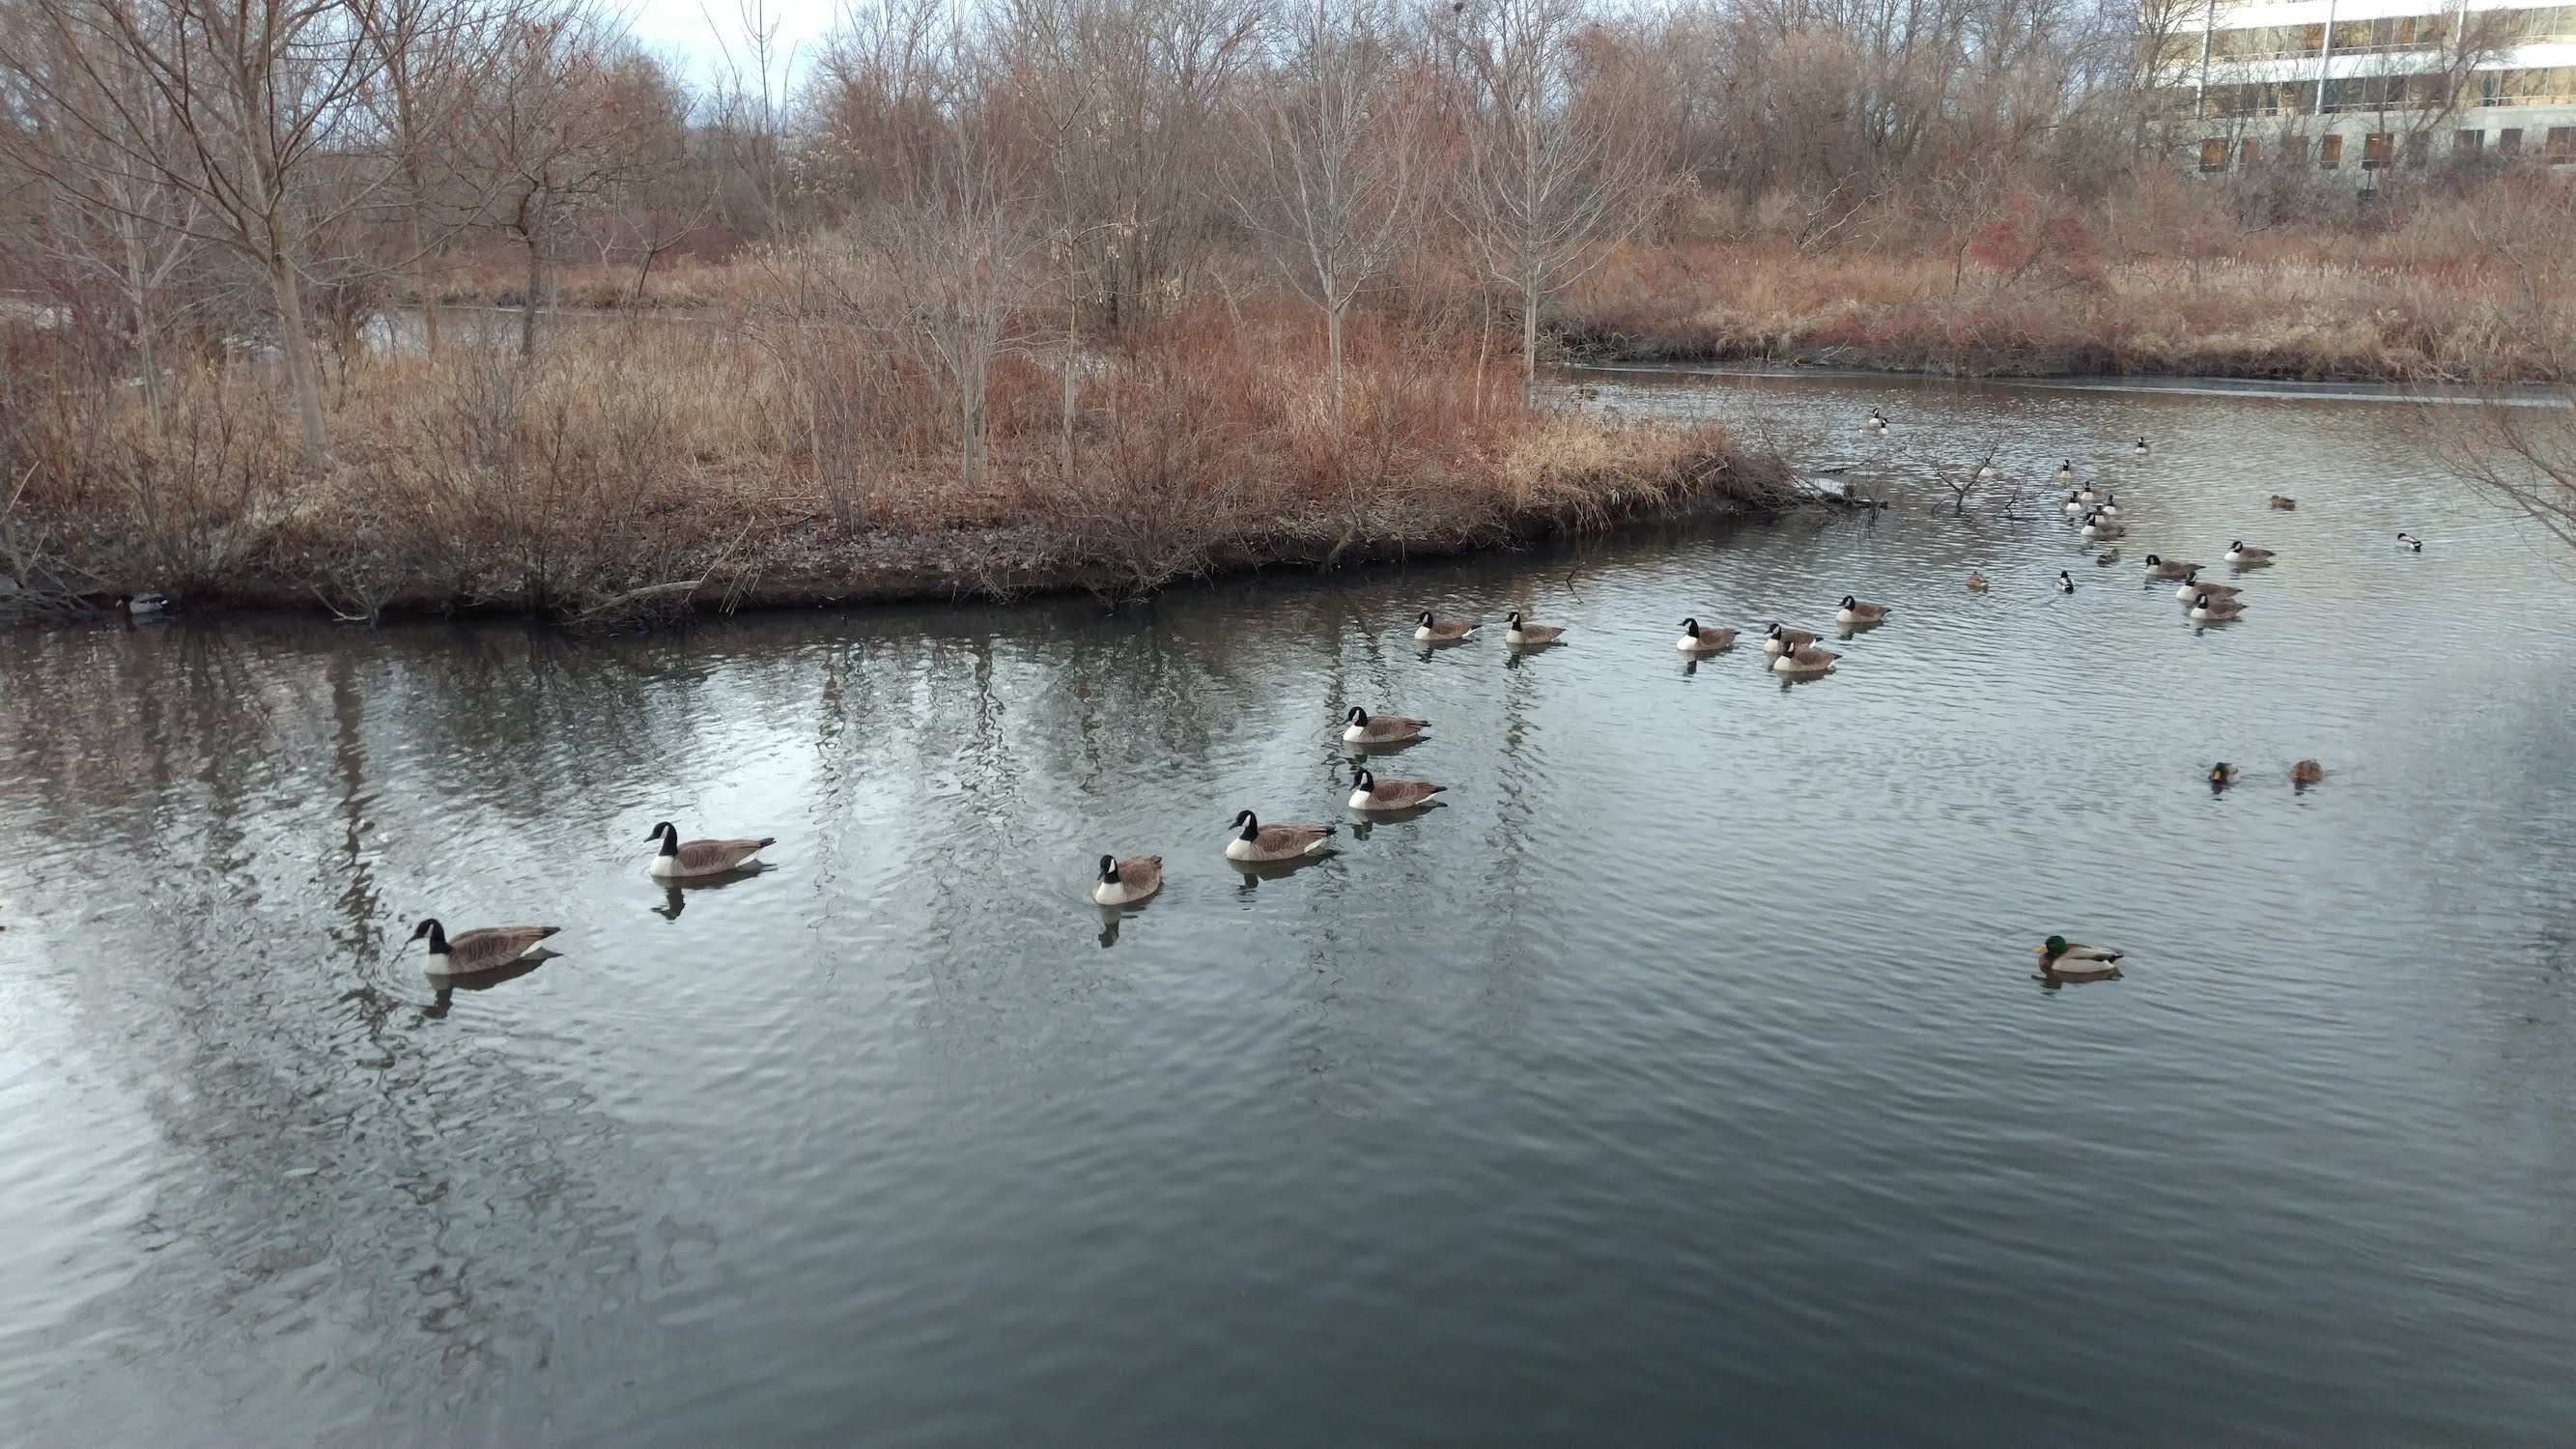 many geese, some ducks